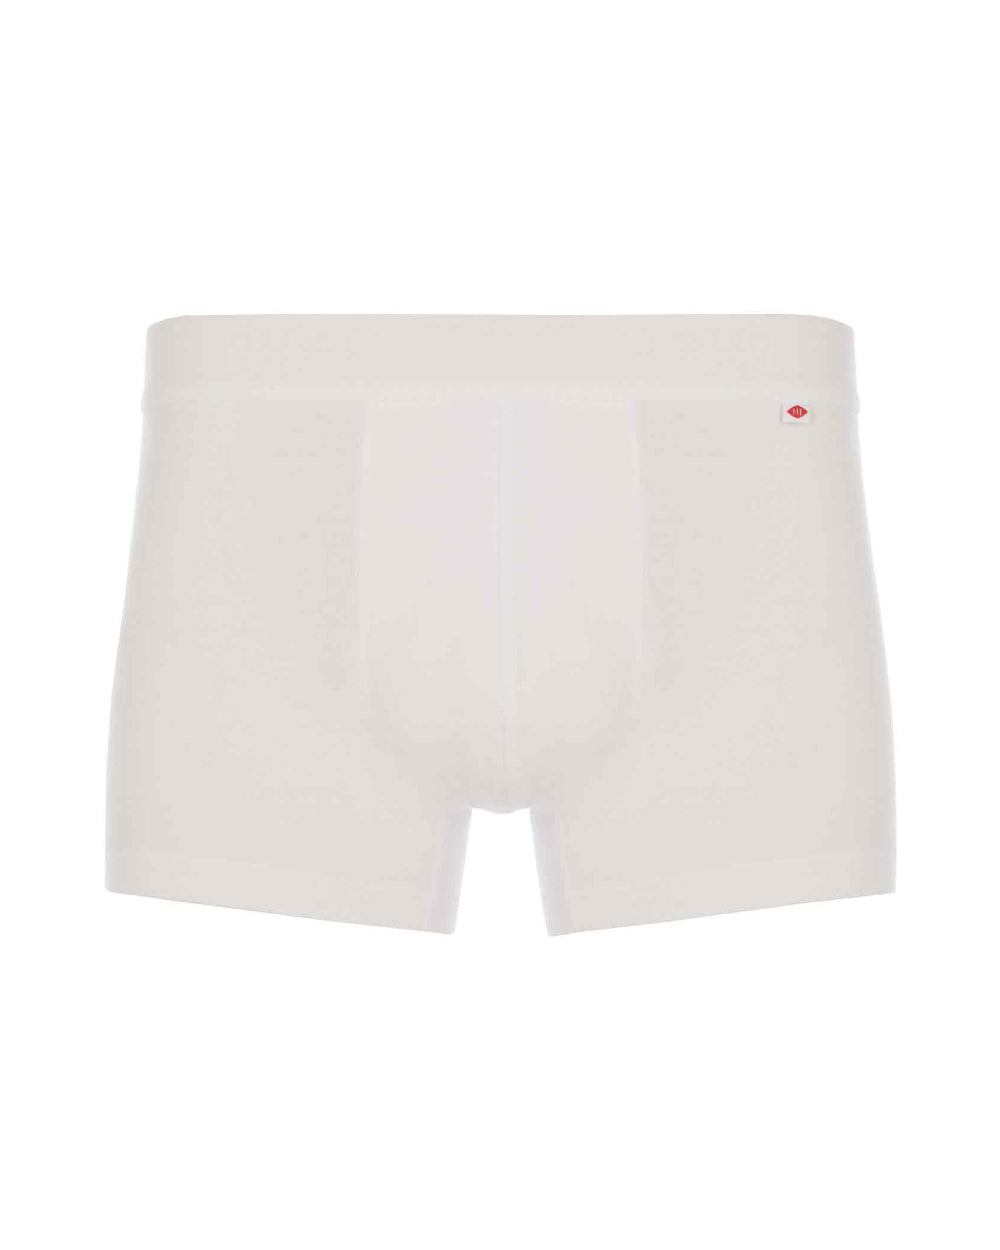 HJ Hall 2 Pack Cotton Stetch Trunks in White 